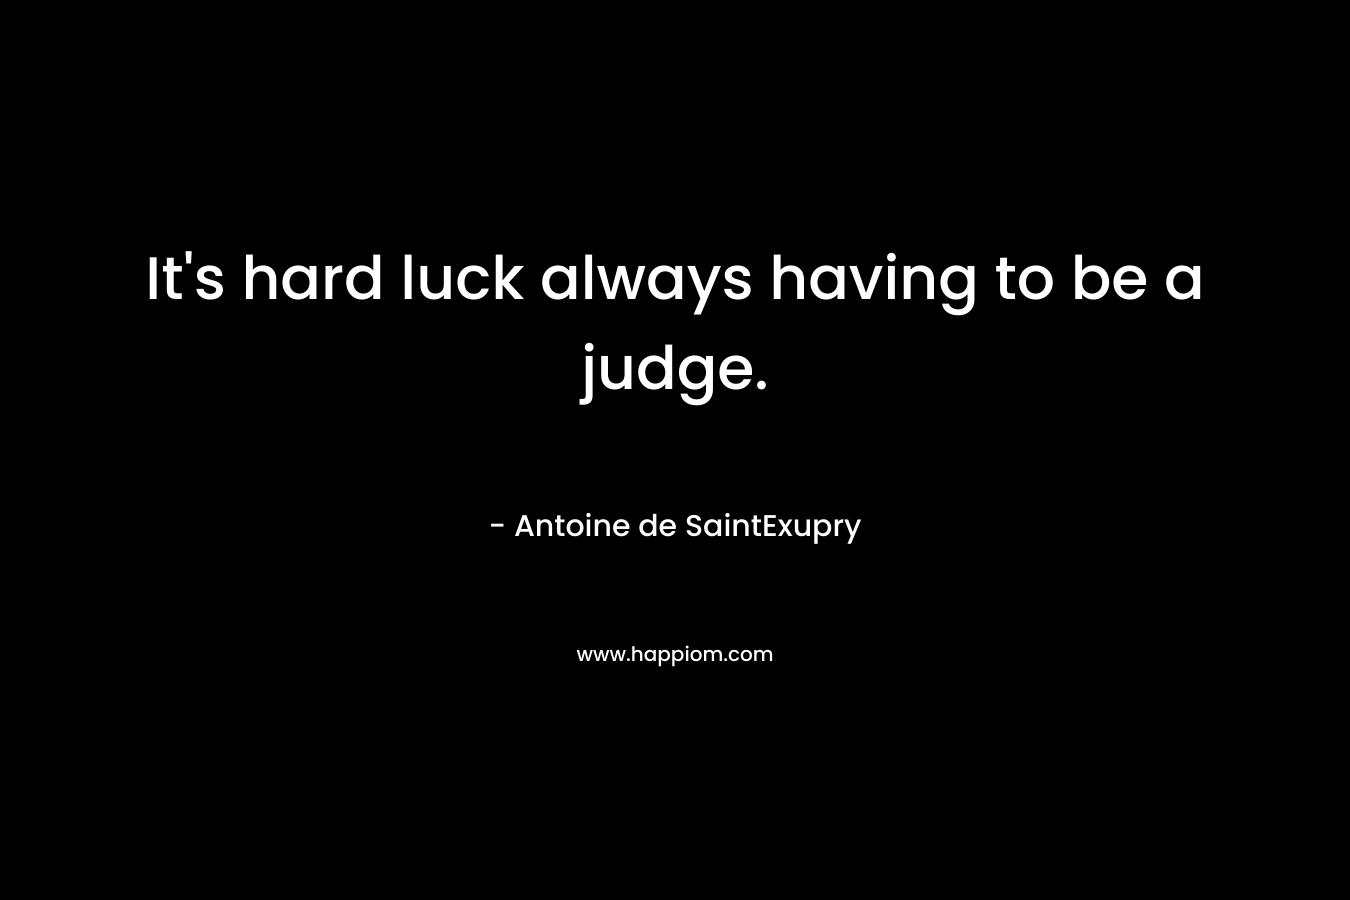 It's hard luck always having to be a judge.